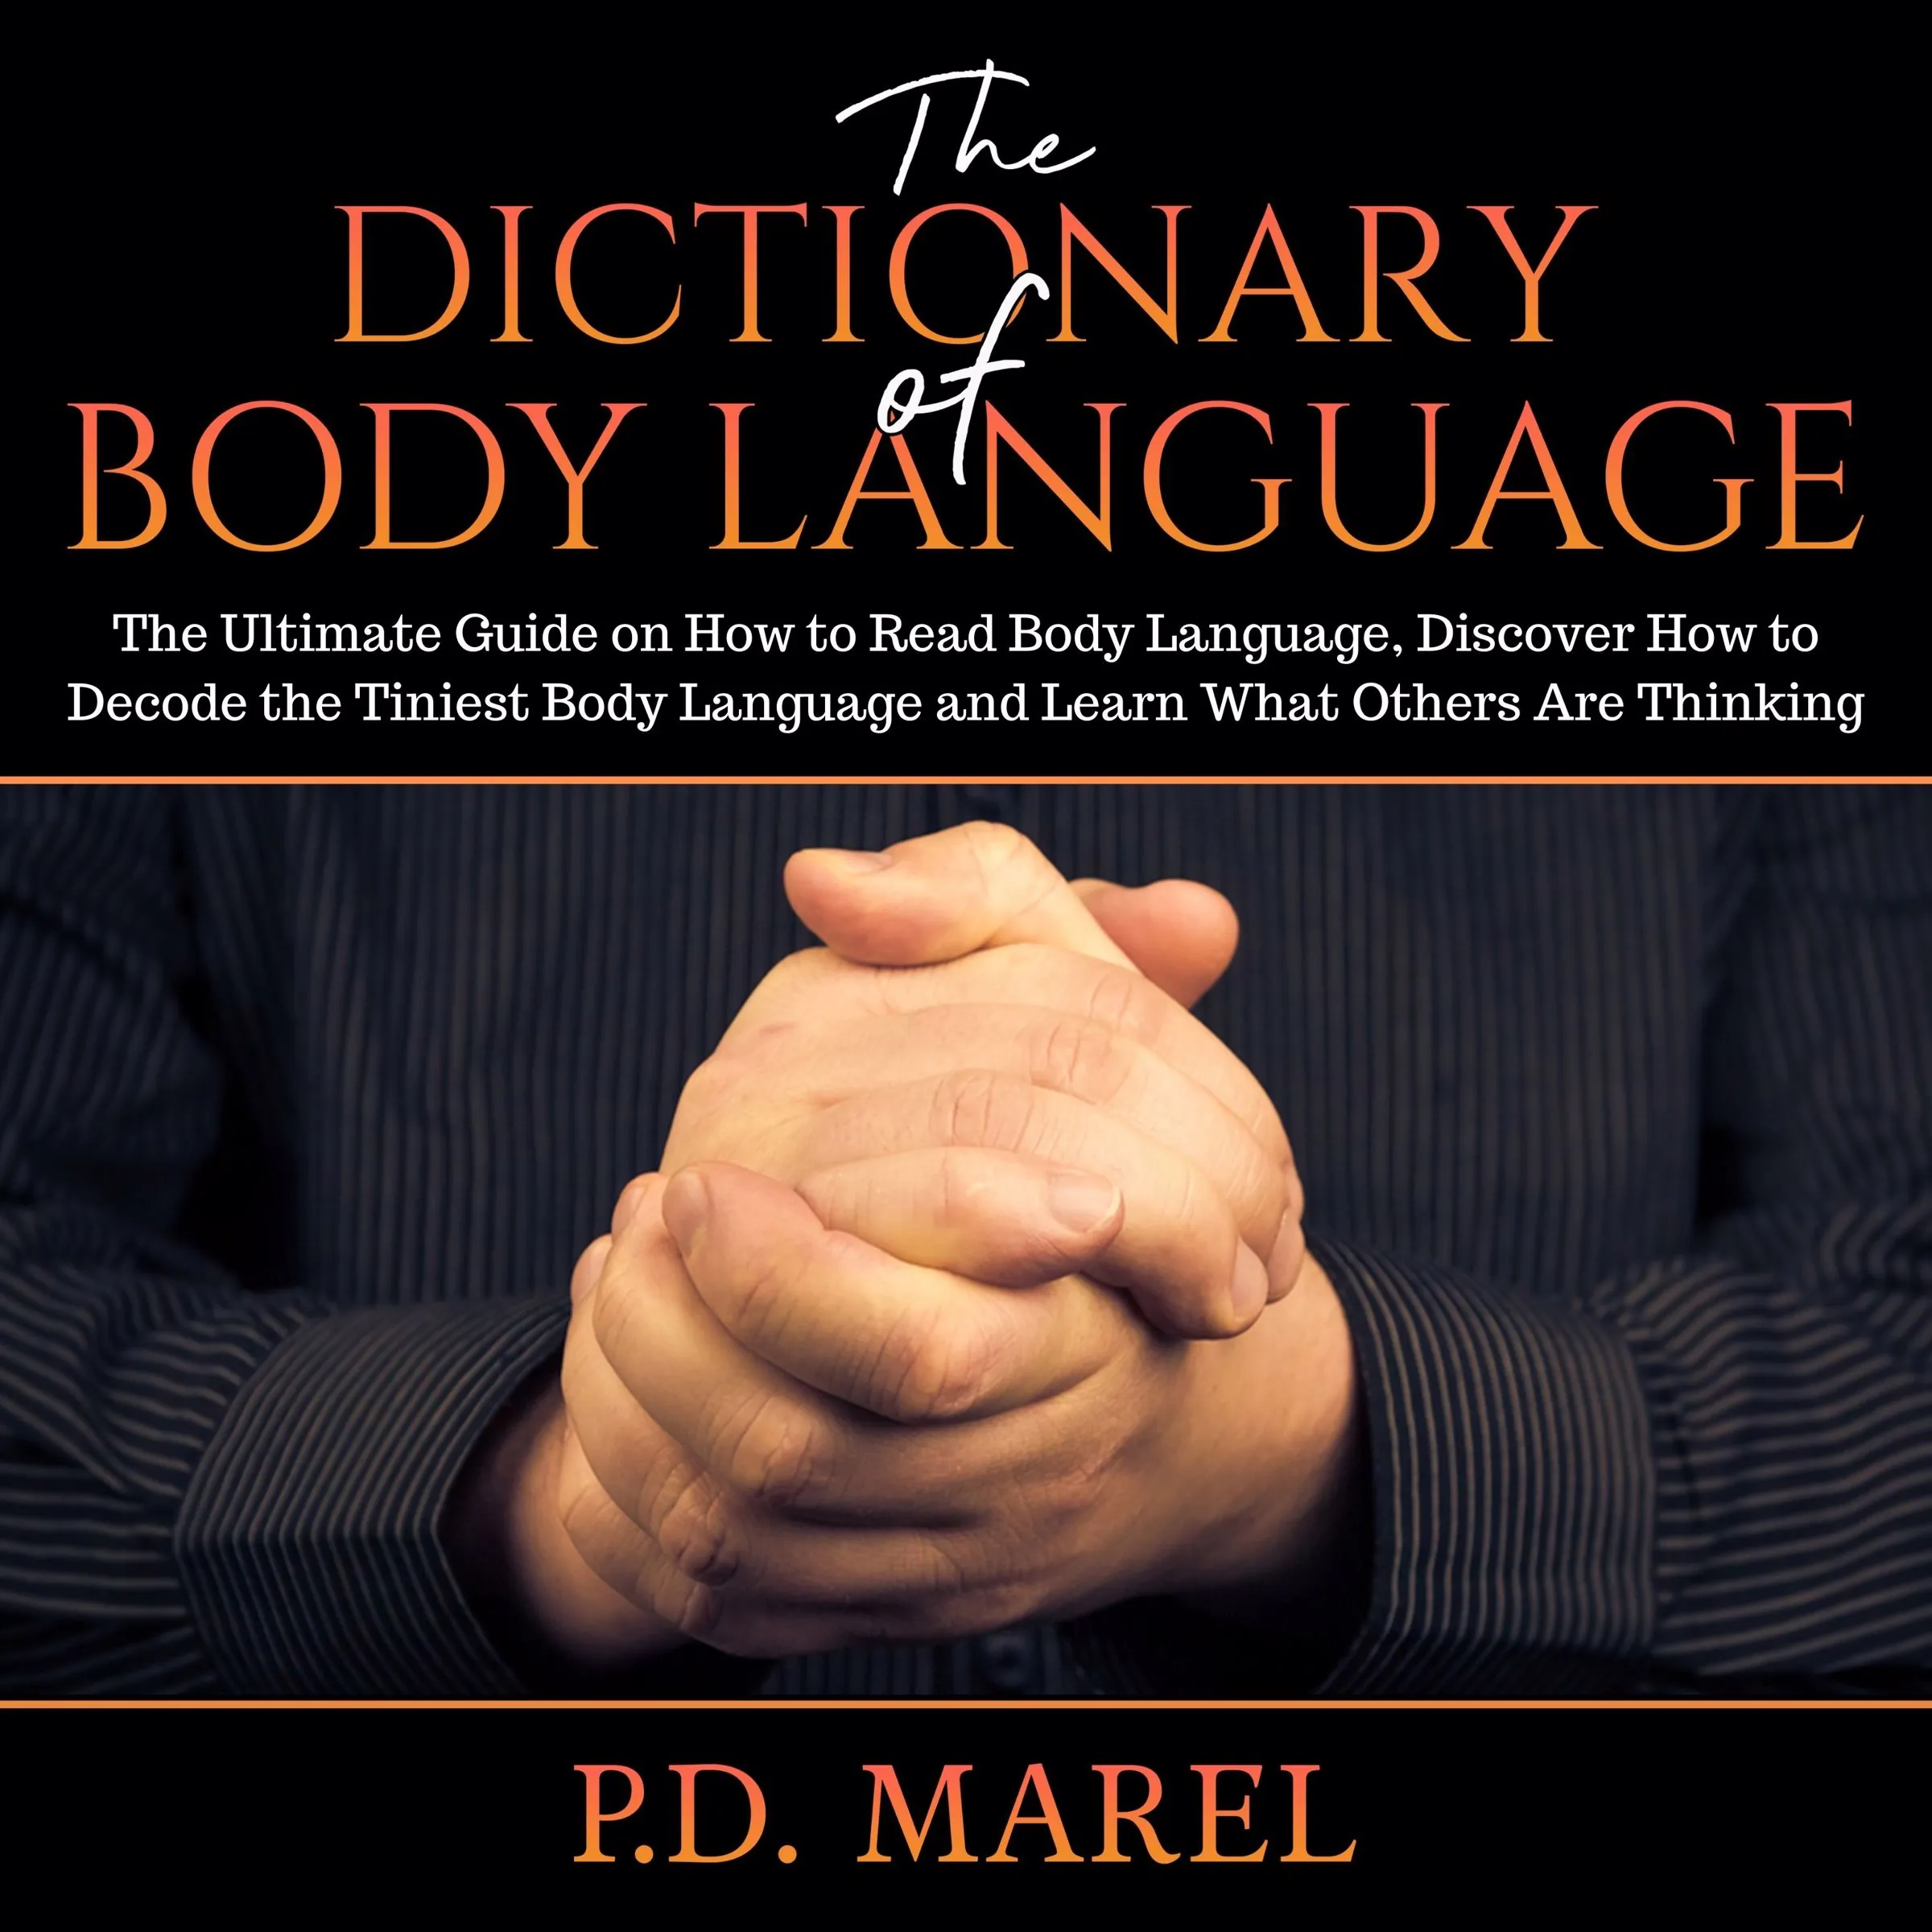 The Dictionary of Body Language Audiobook by P.D. Marel